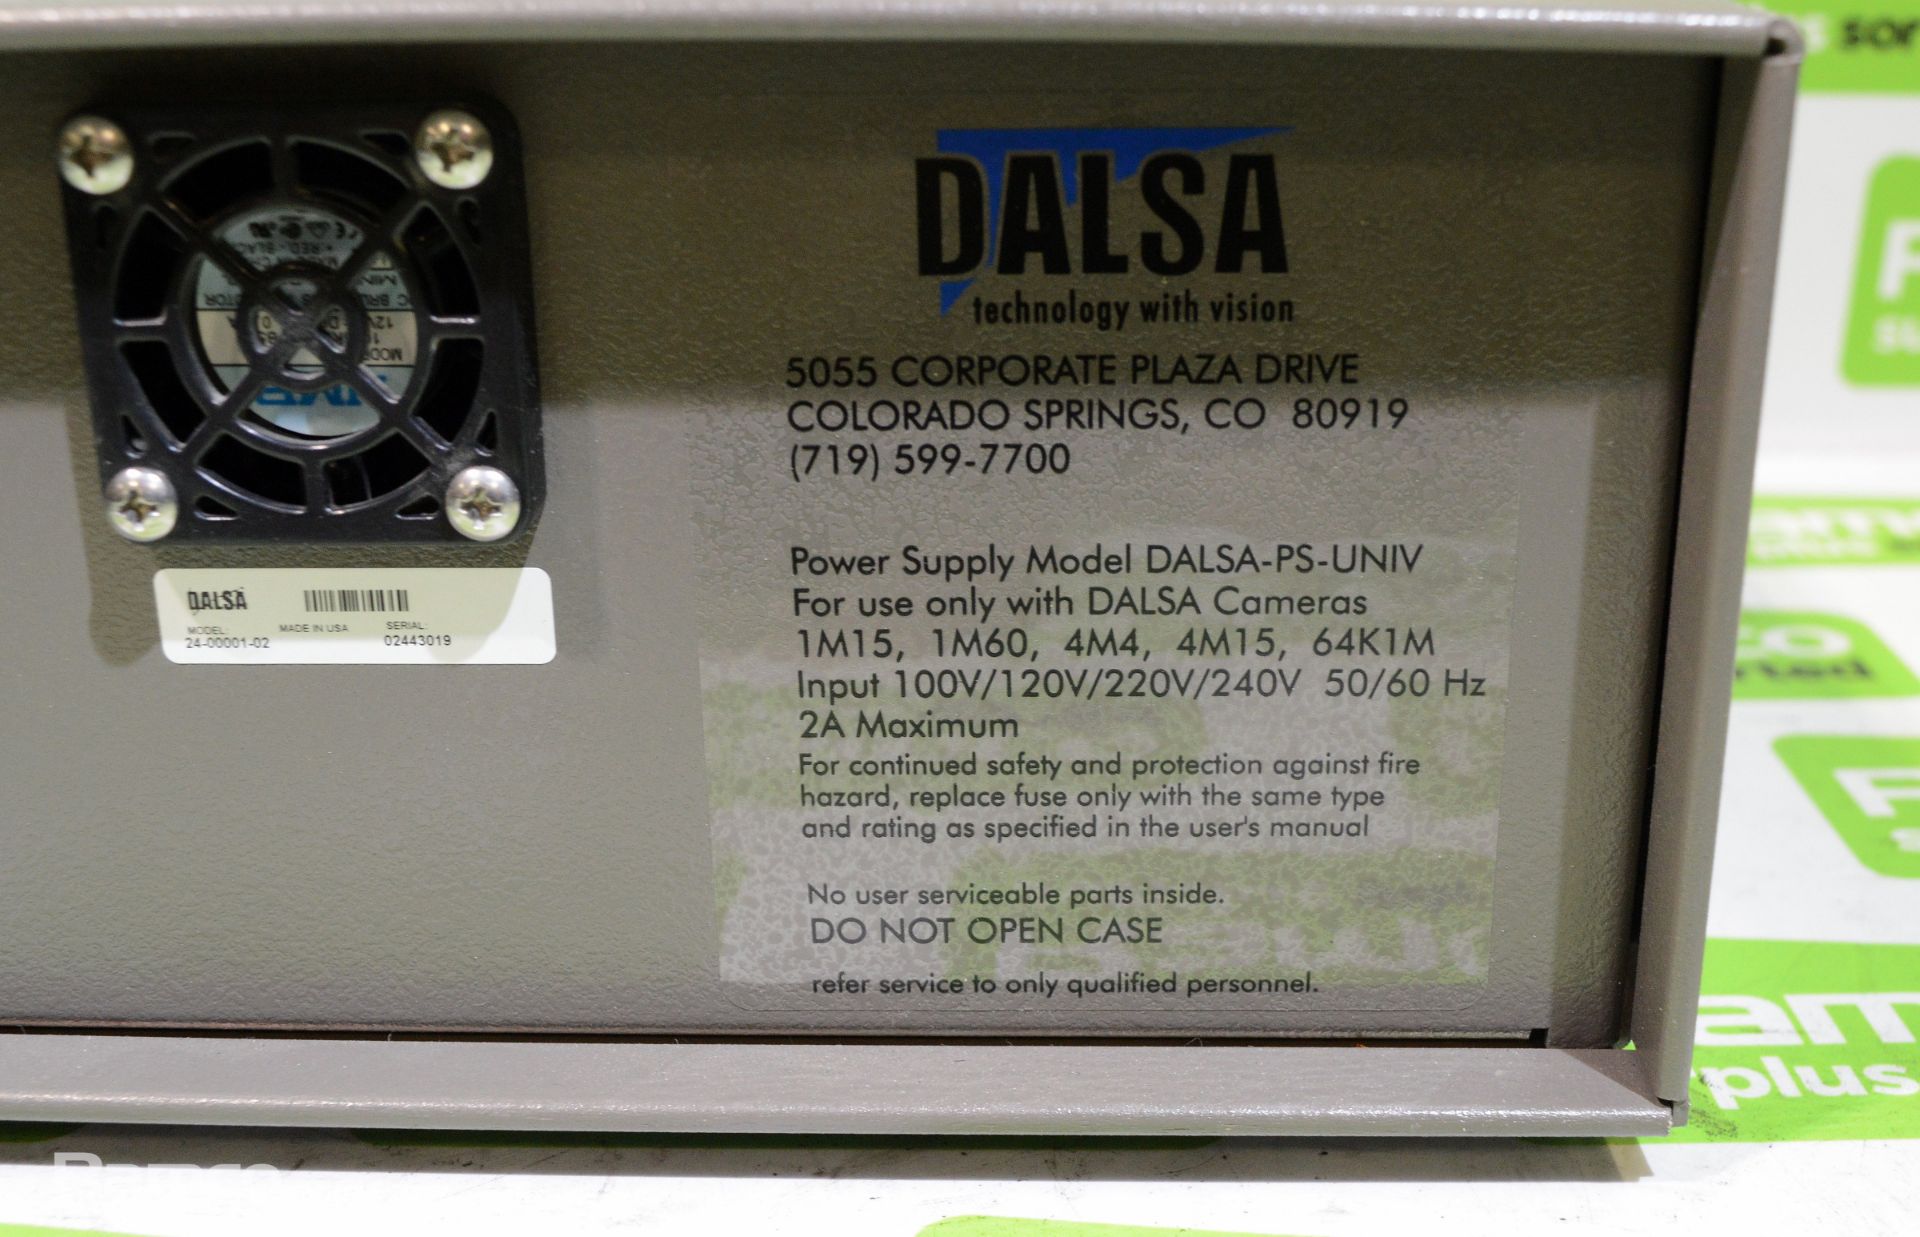 Dalsa camera power supply unit (PSU) with cables 25x25x10 - Image 2 of 4